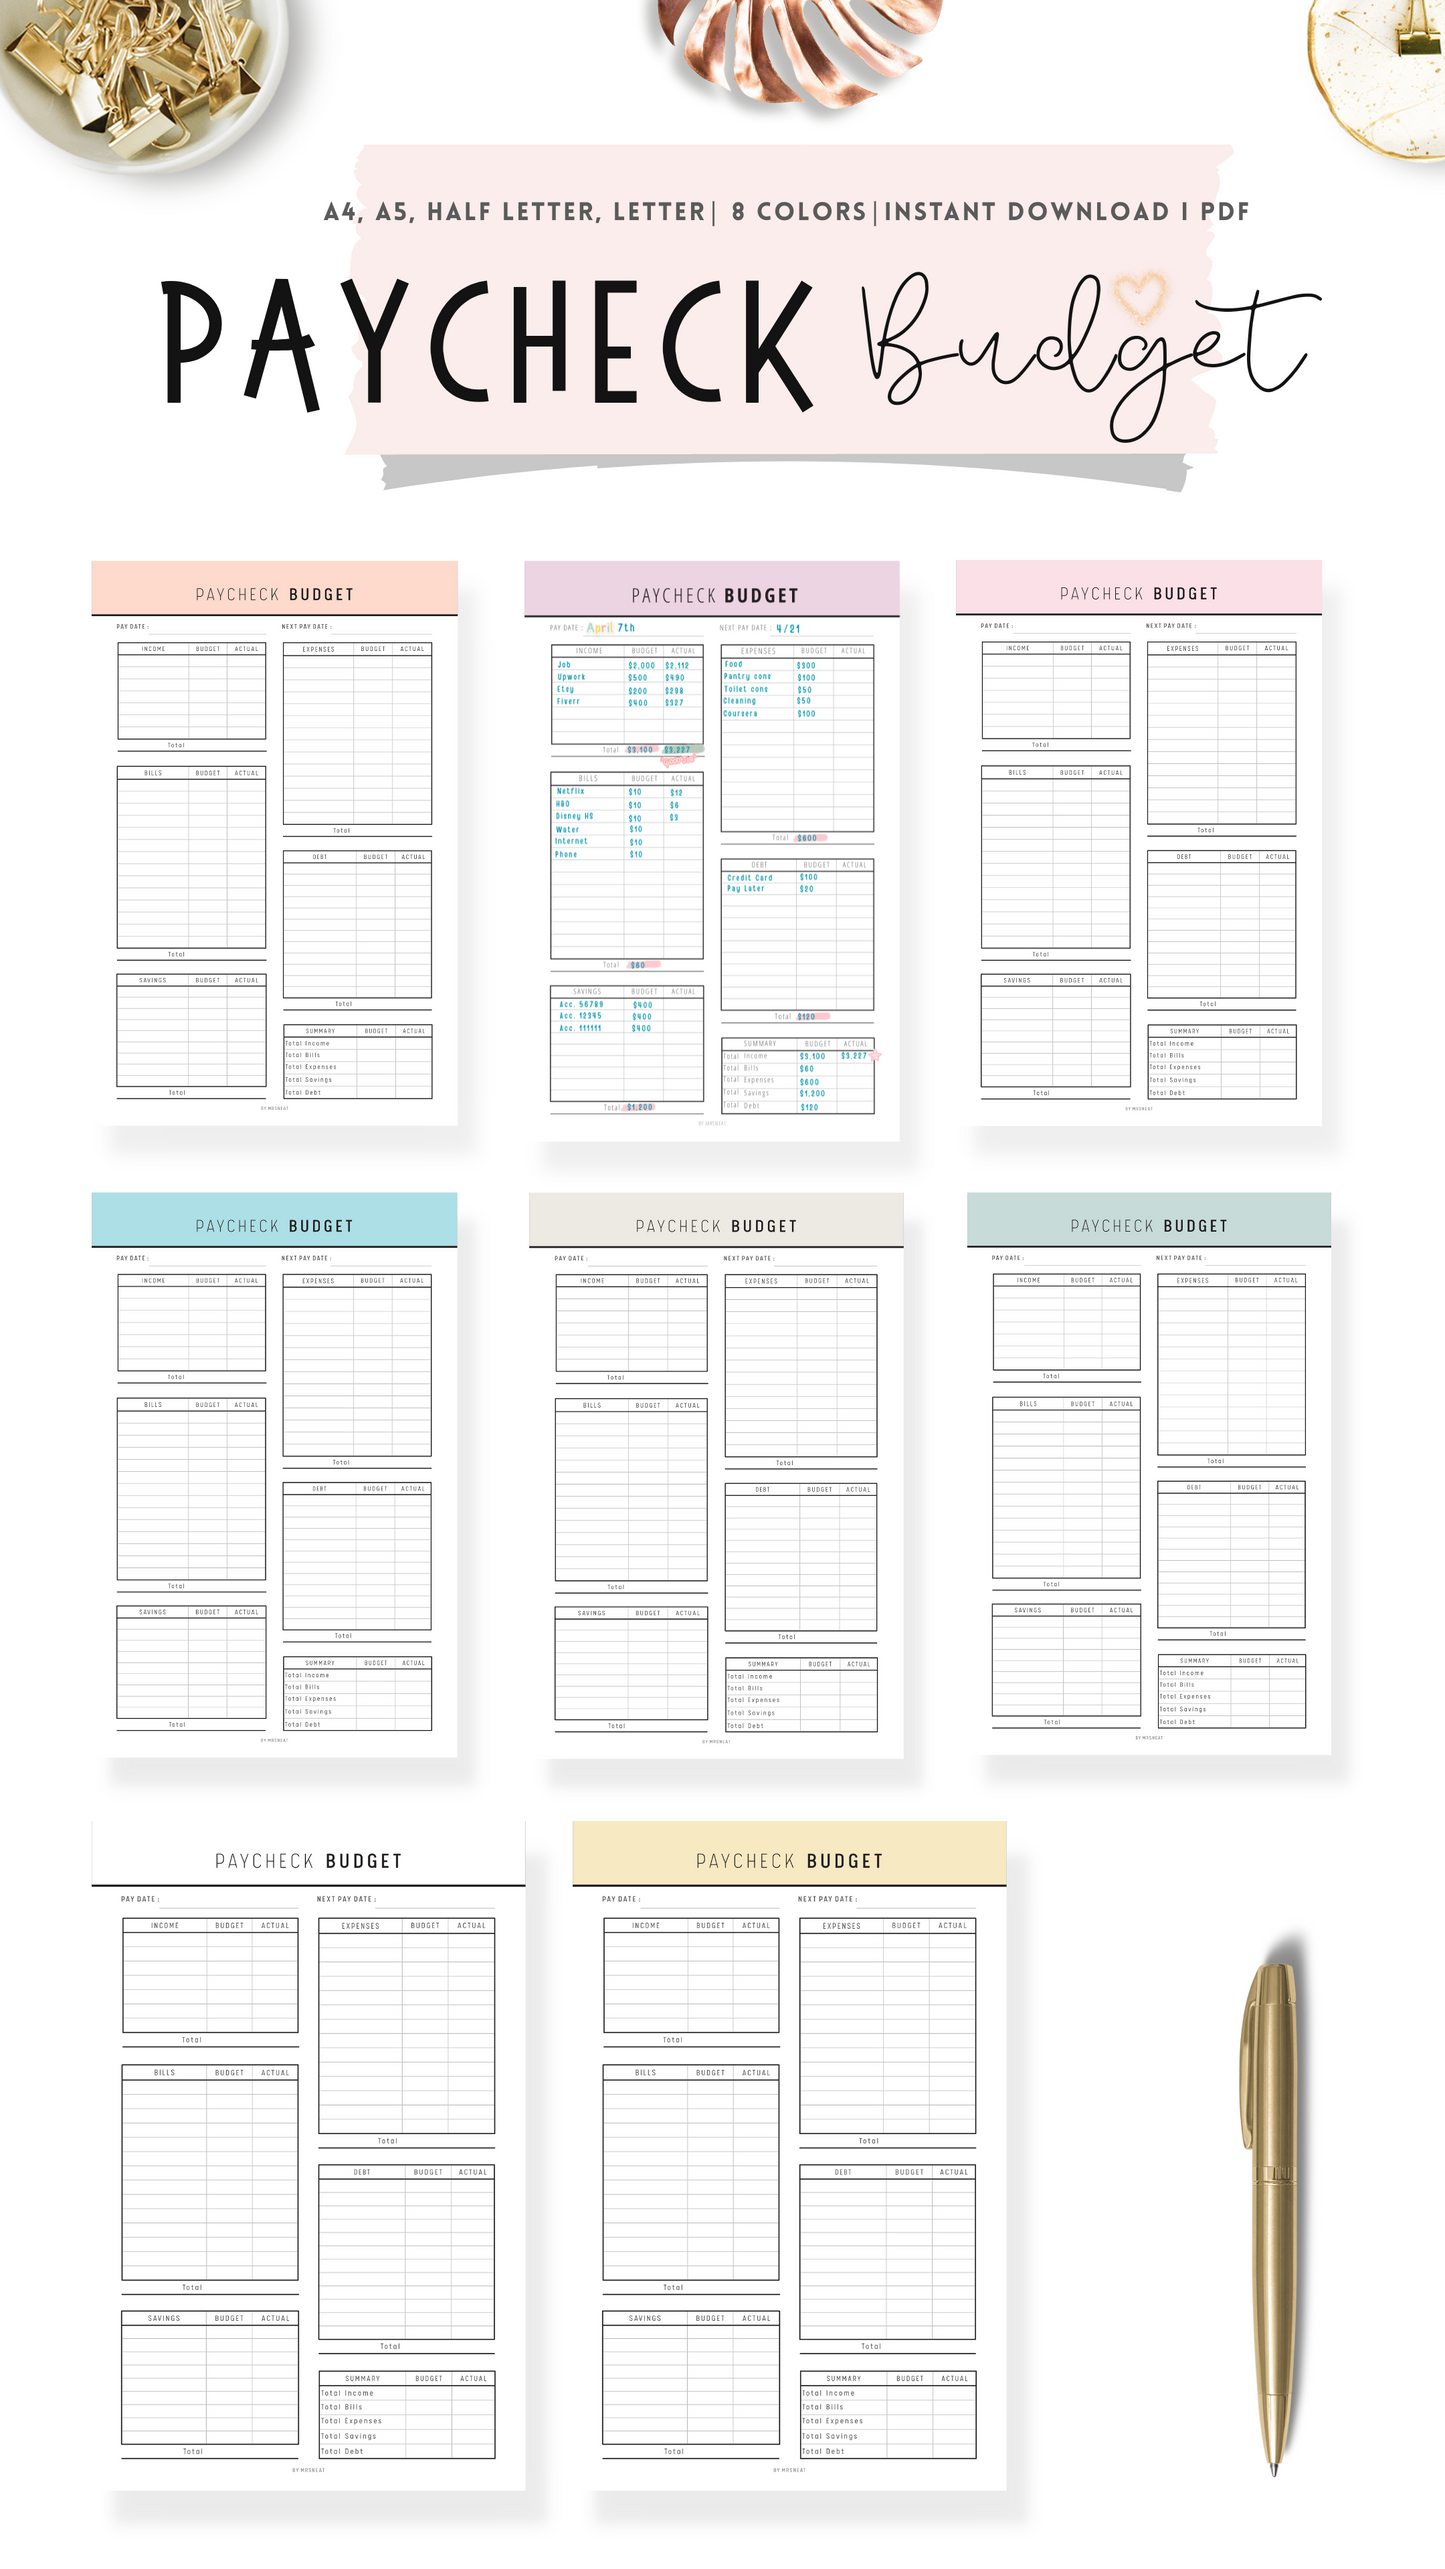 Paycheck Budget Planner Printable in 7 colors